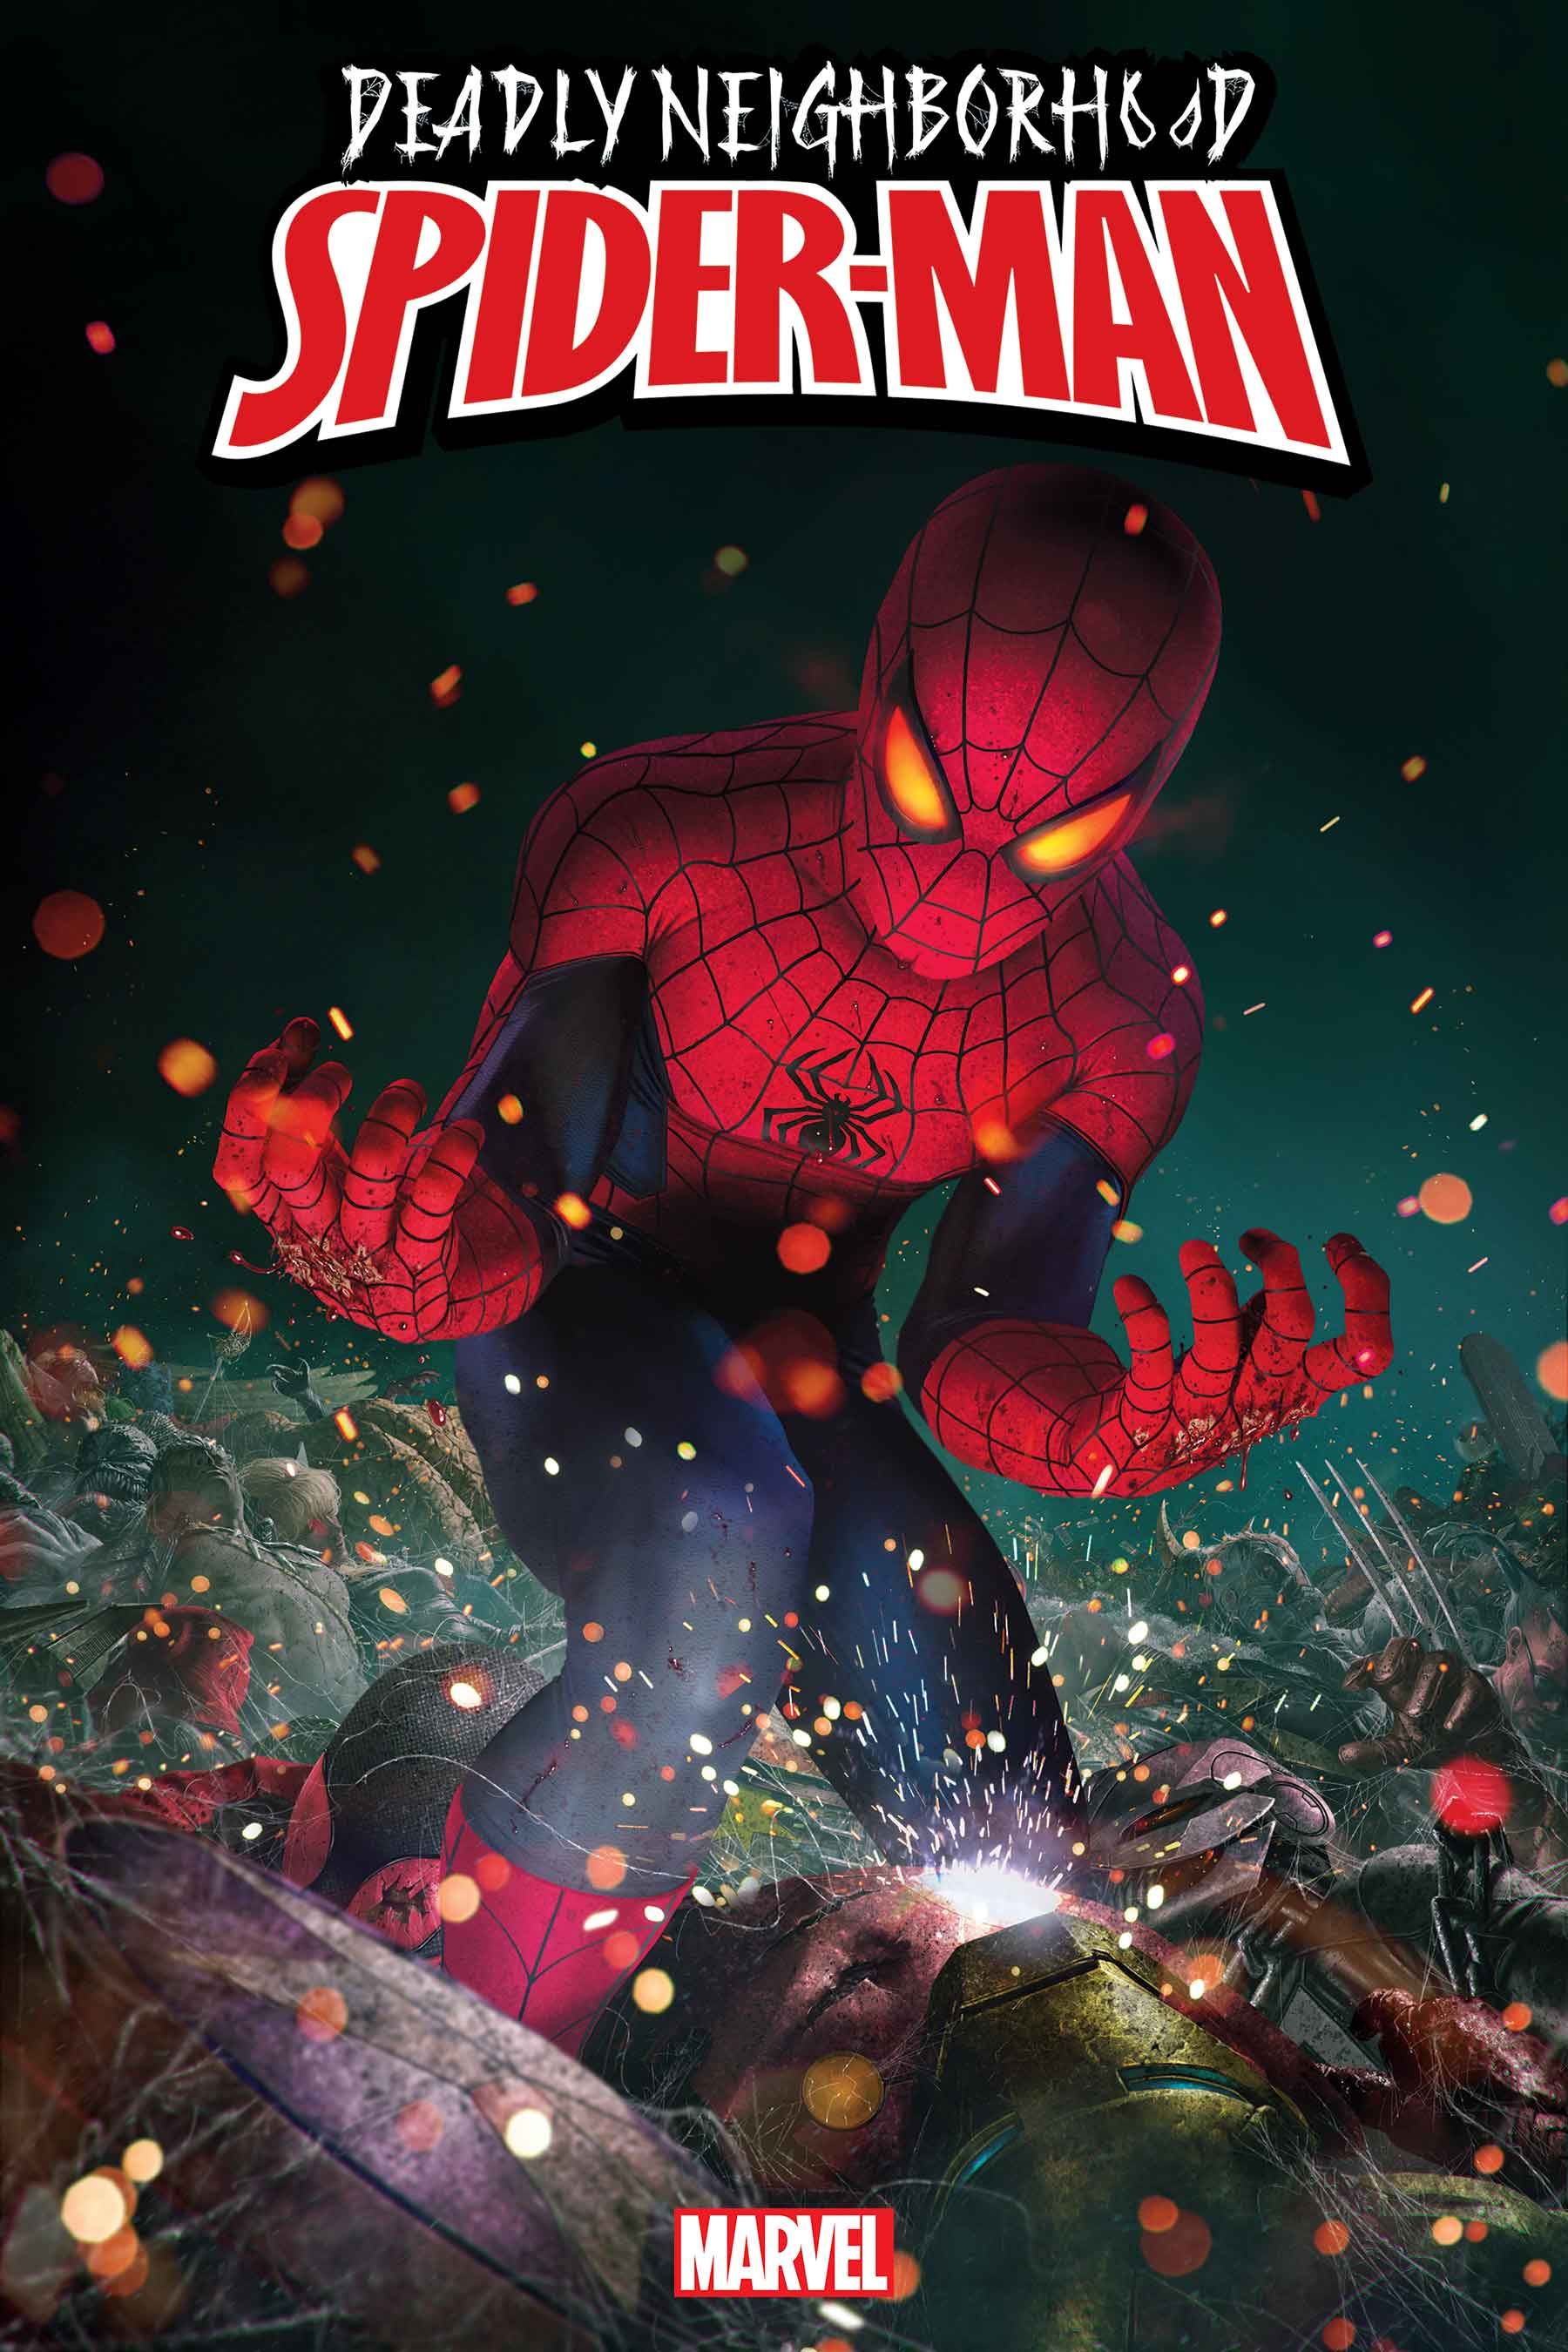 REVIEW: Marvel's Deadly Neighborhood Spider-Man #1